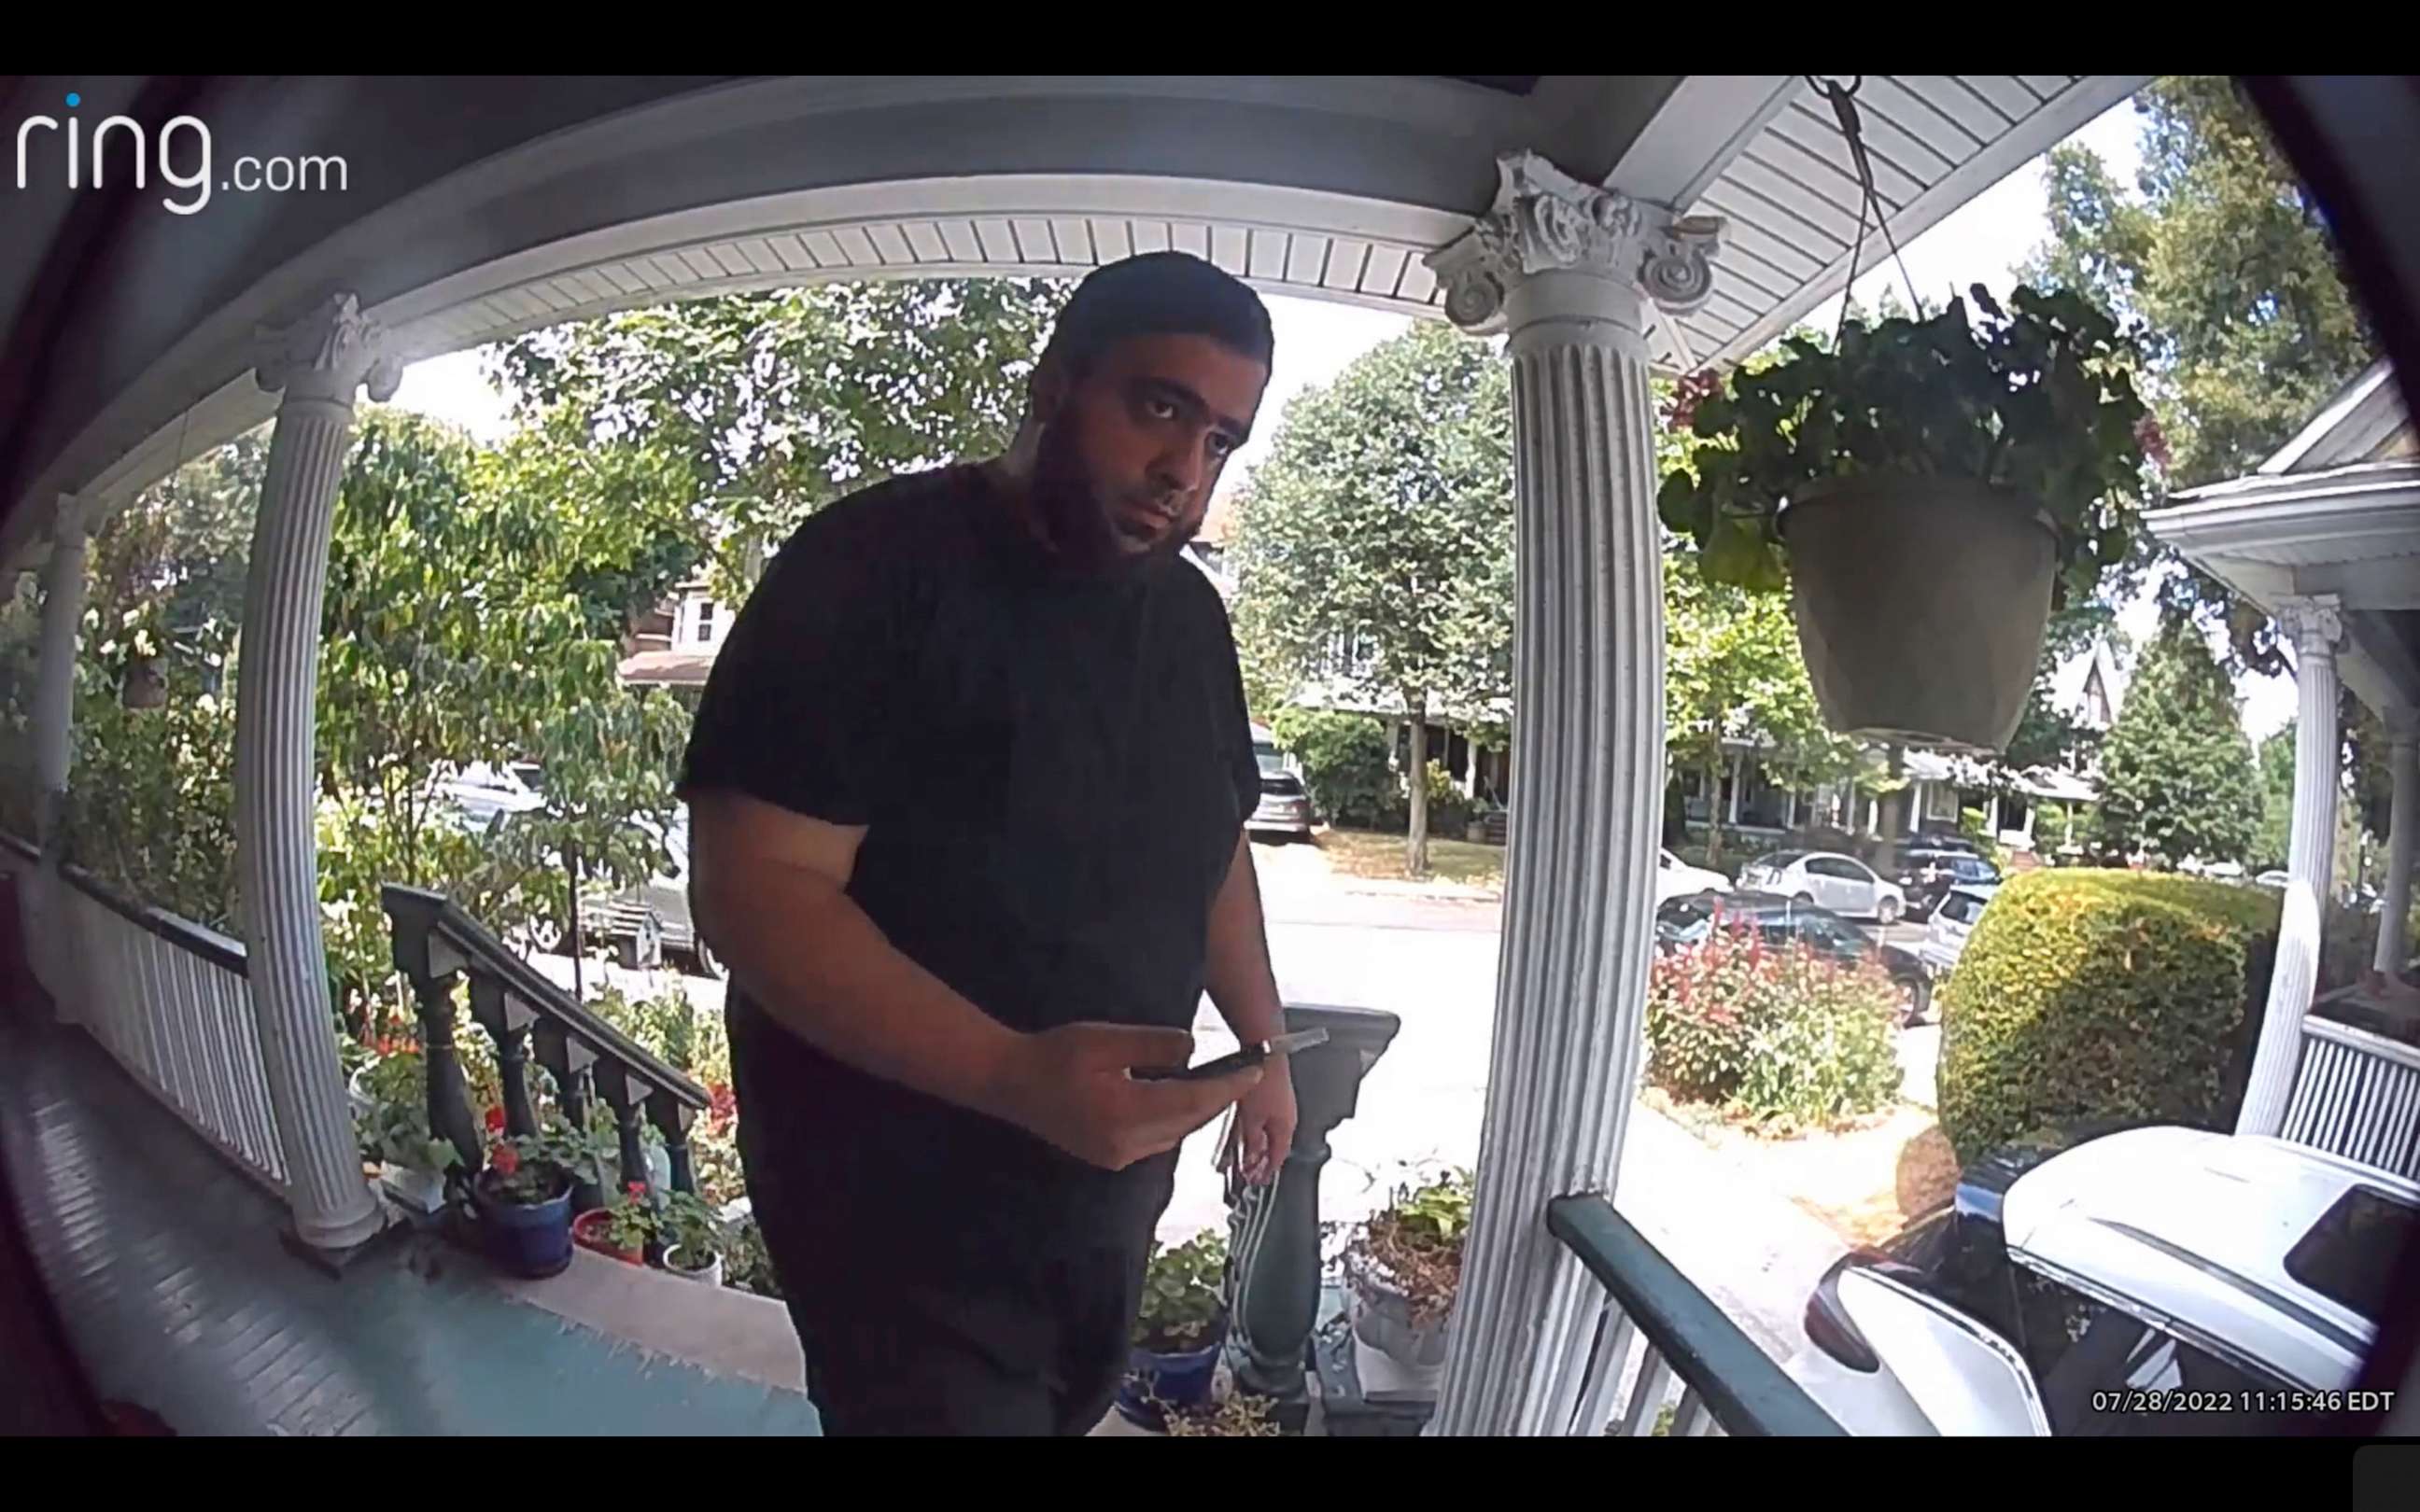 PHOTO: An image taken from a doorbell video shows Khalid Mehdiyev on the porch of the home of Masih Alinejad, July 28, 2022, in the Brooklyn borough of New York.